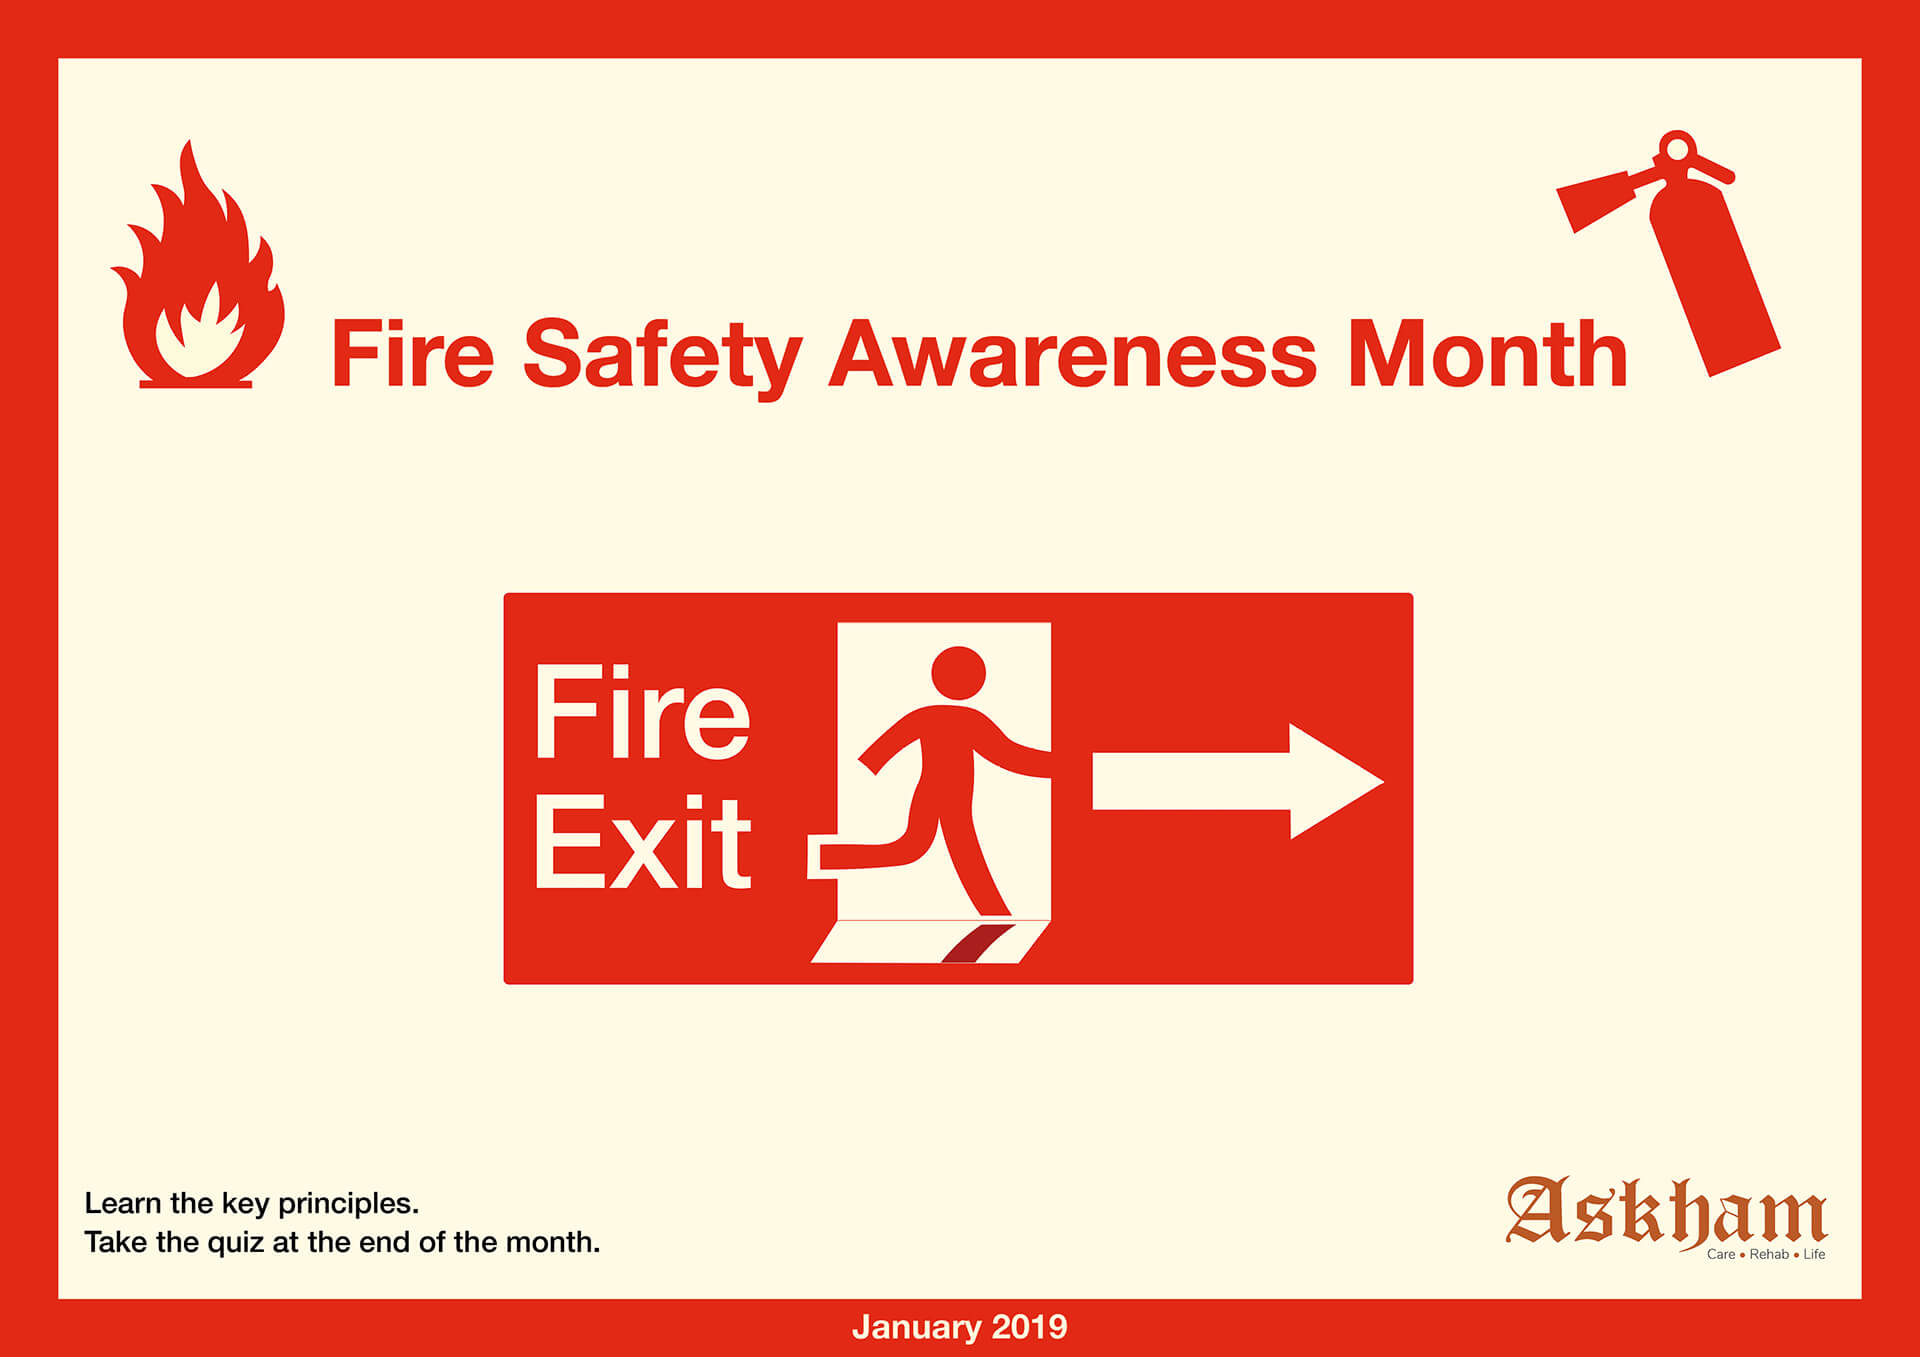 Fire Safety Awareness Month at Askham